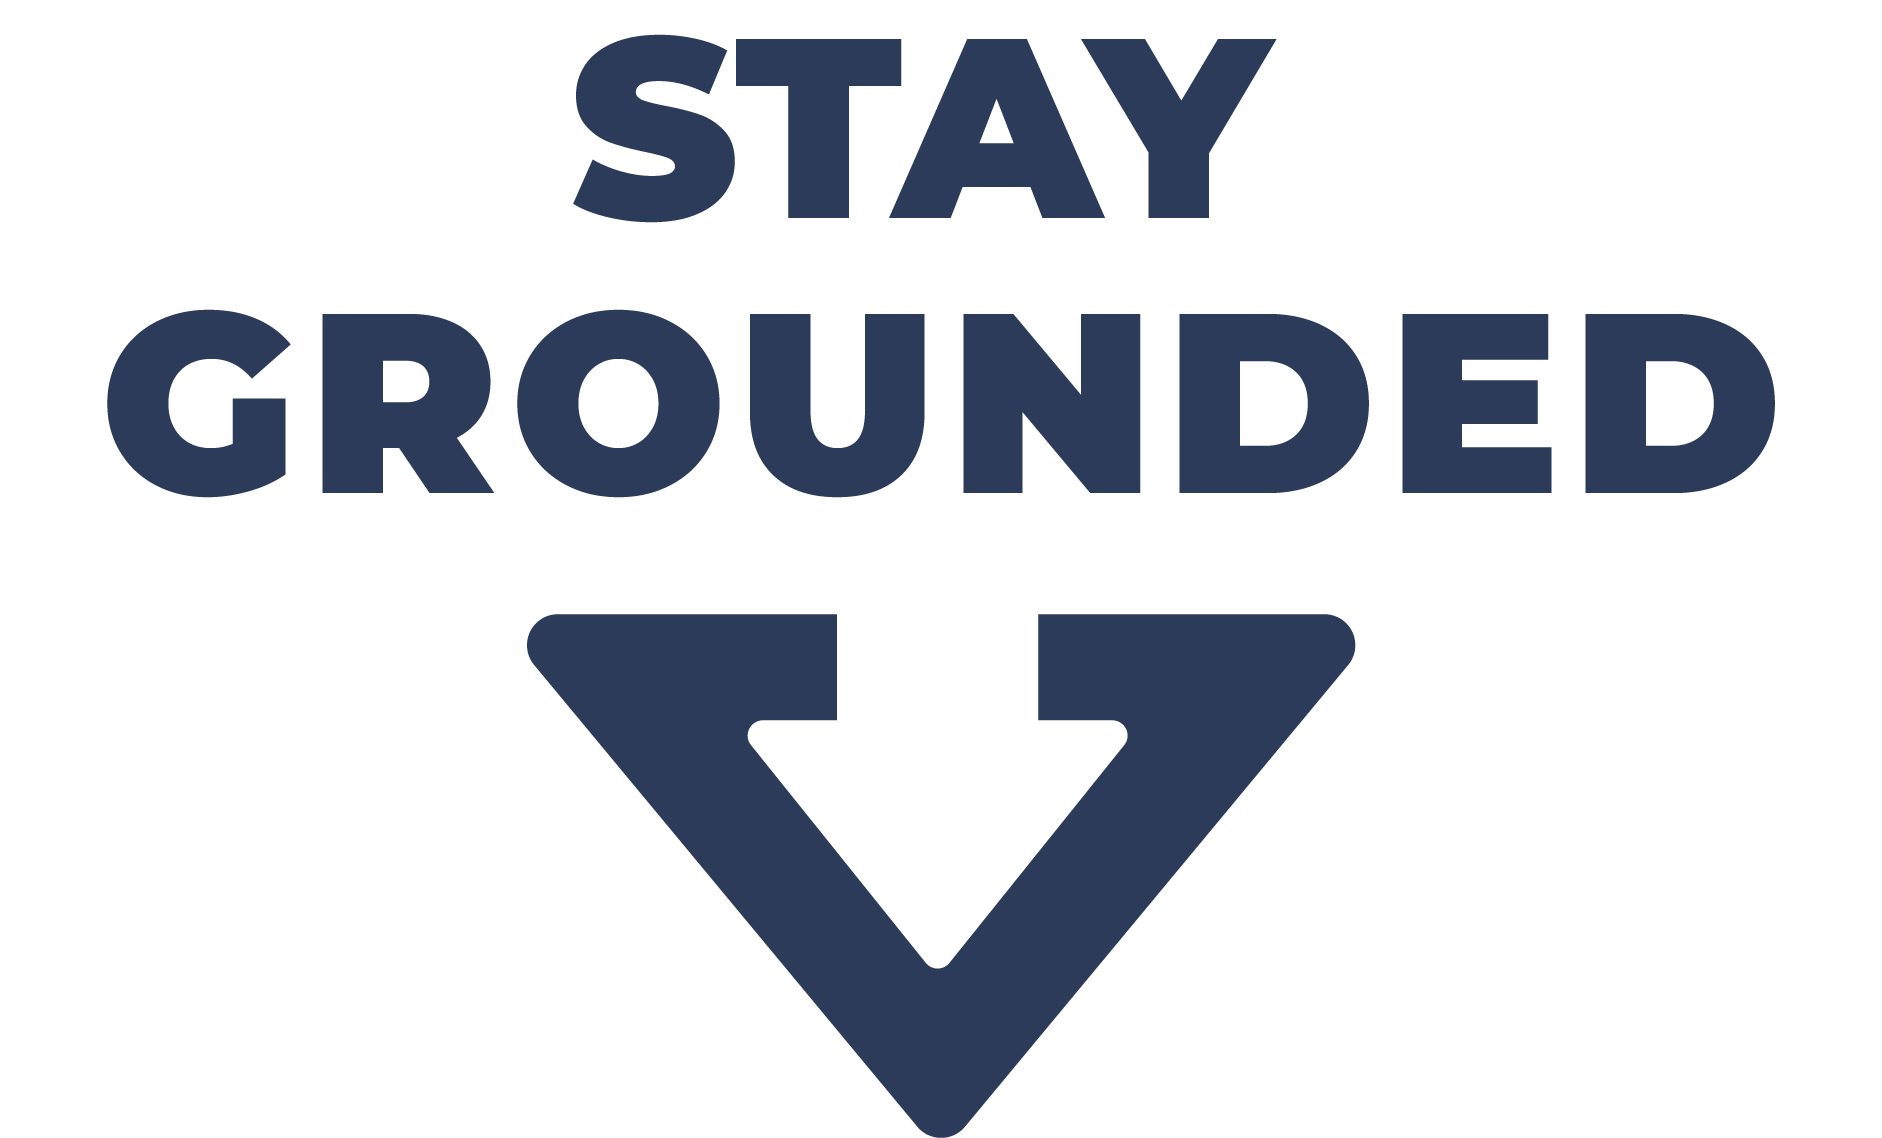 (c) Stay-grounded.org